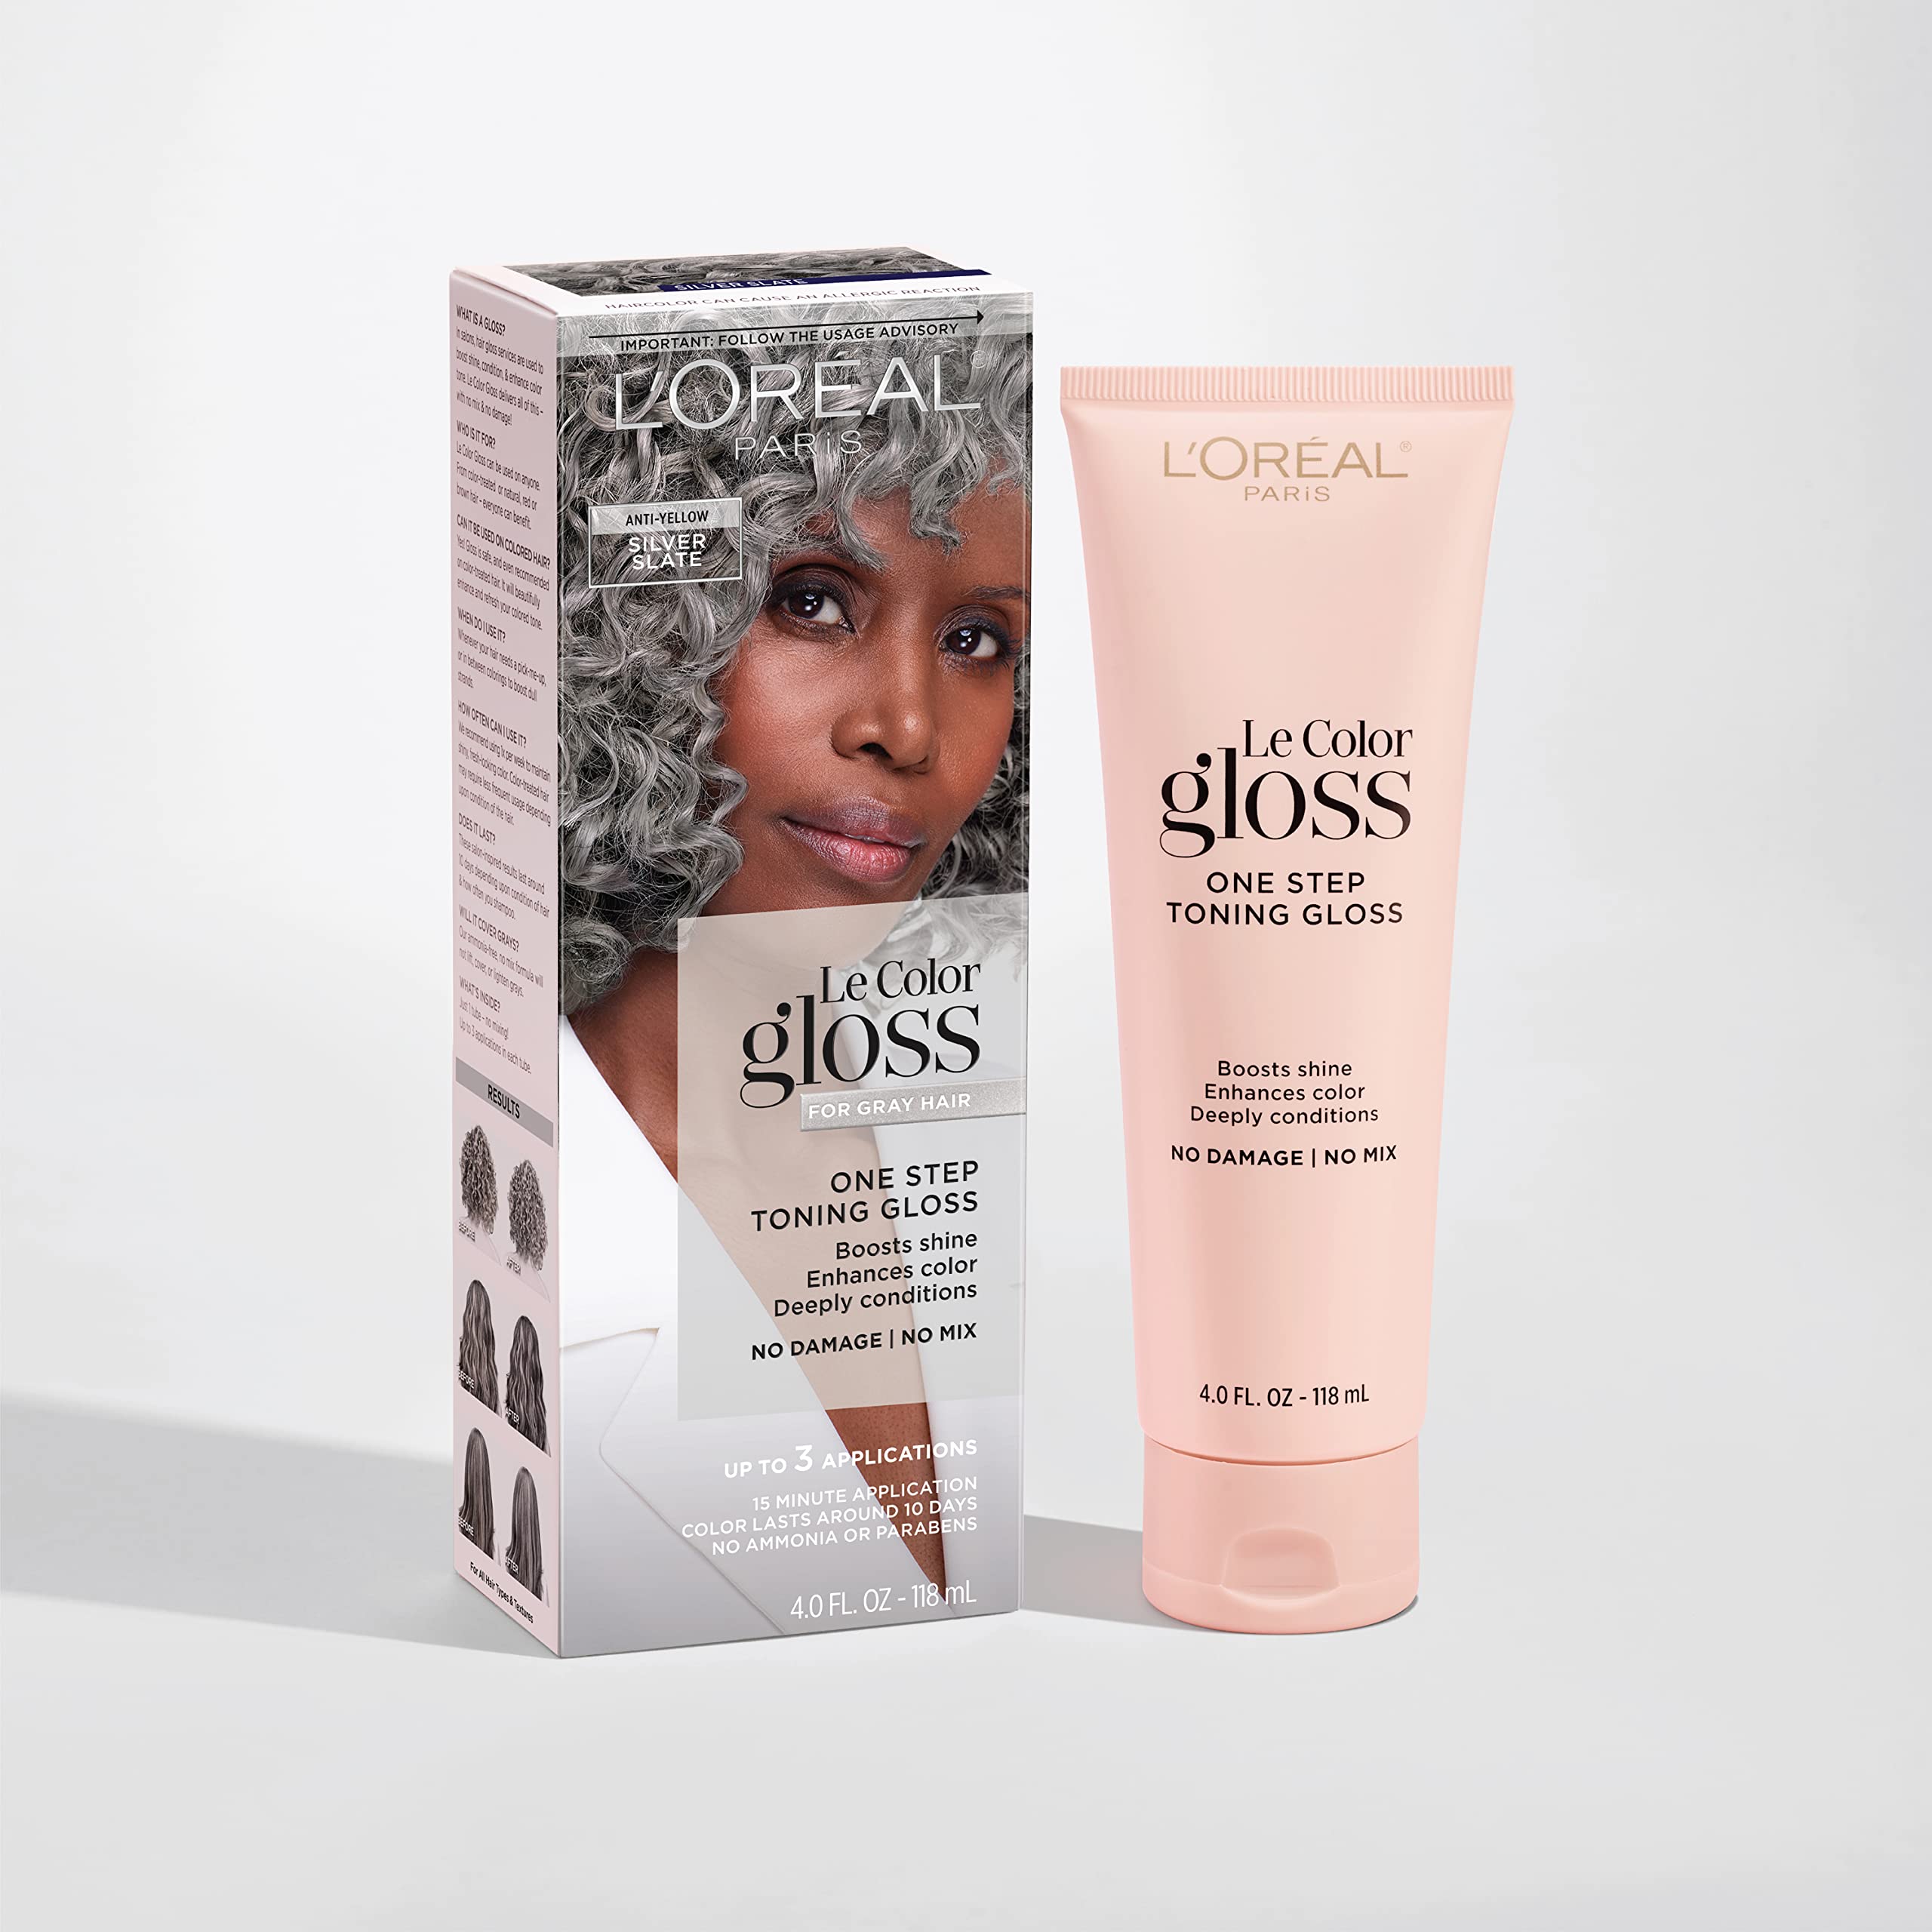 L’Oréal Paris Le Color Gloss One Step Toning Gloss, In-Shower Hair Toner with Deep Conditioning Treatment Formula for Gray Hair, Silver Slate, 1 Kit, 32.626 cubic_inches